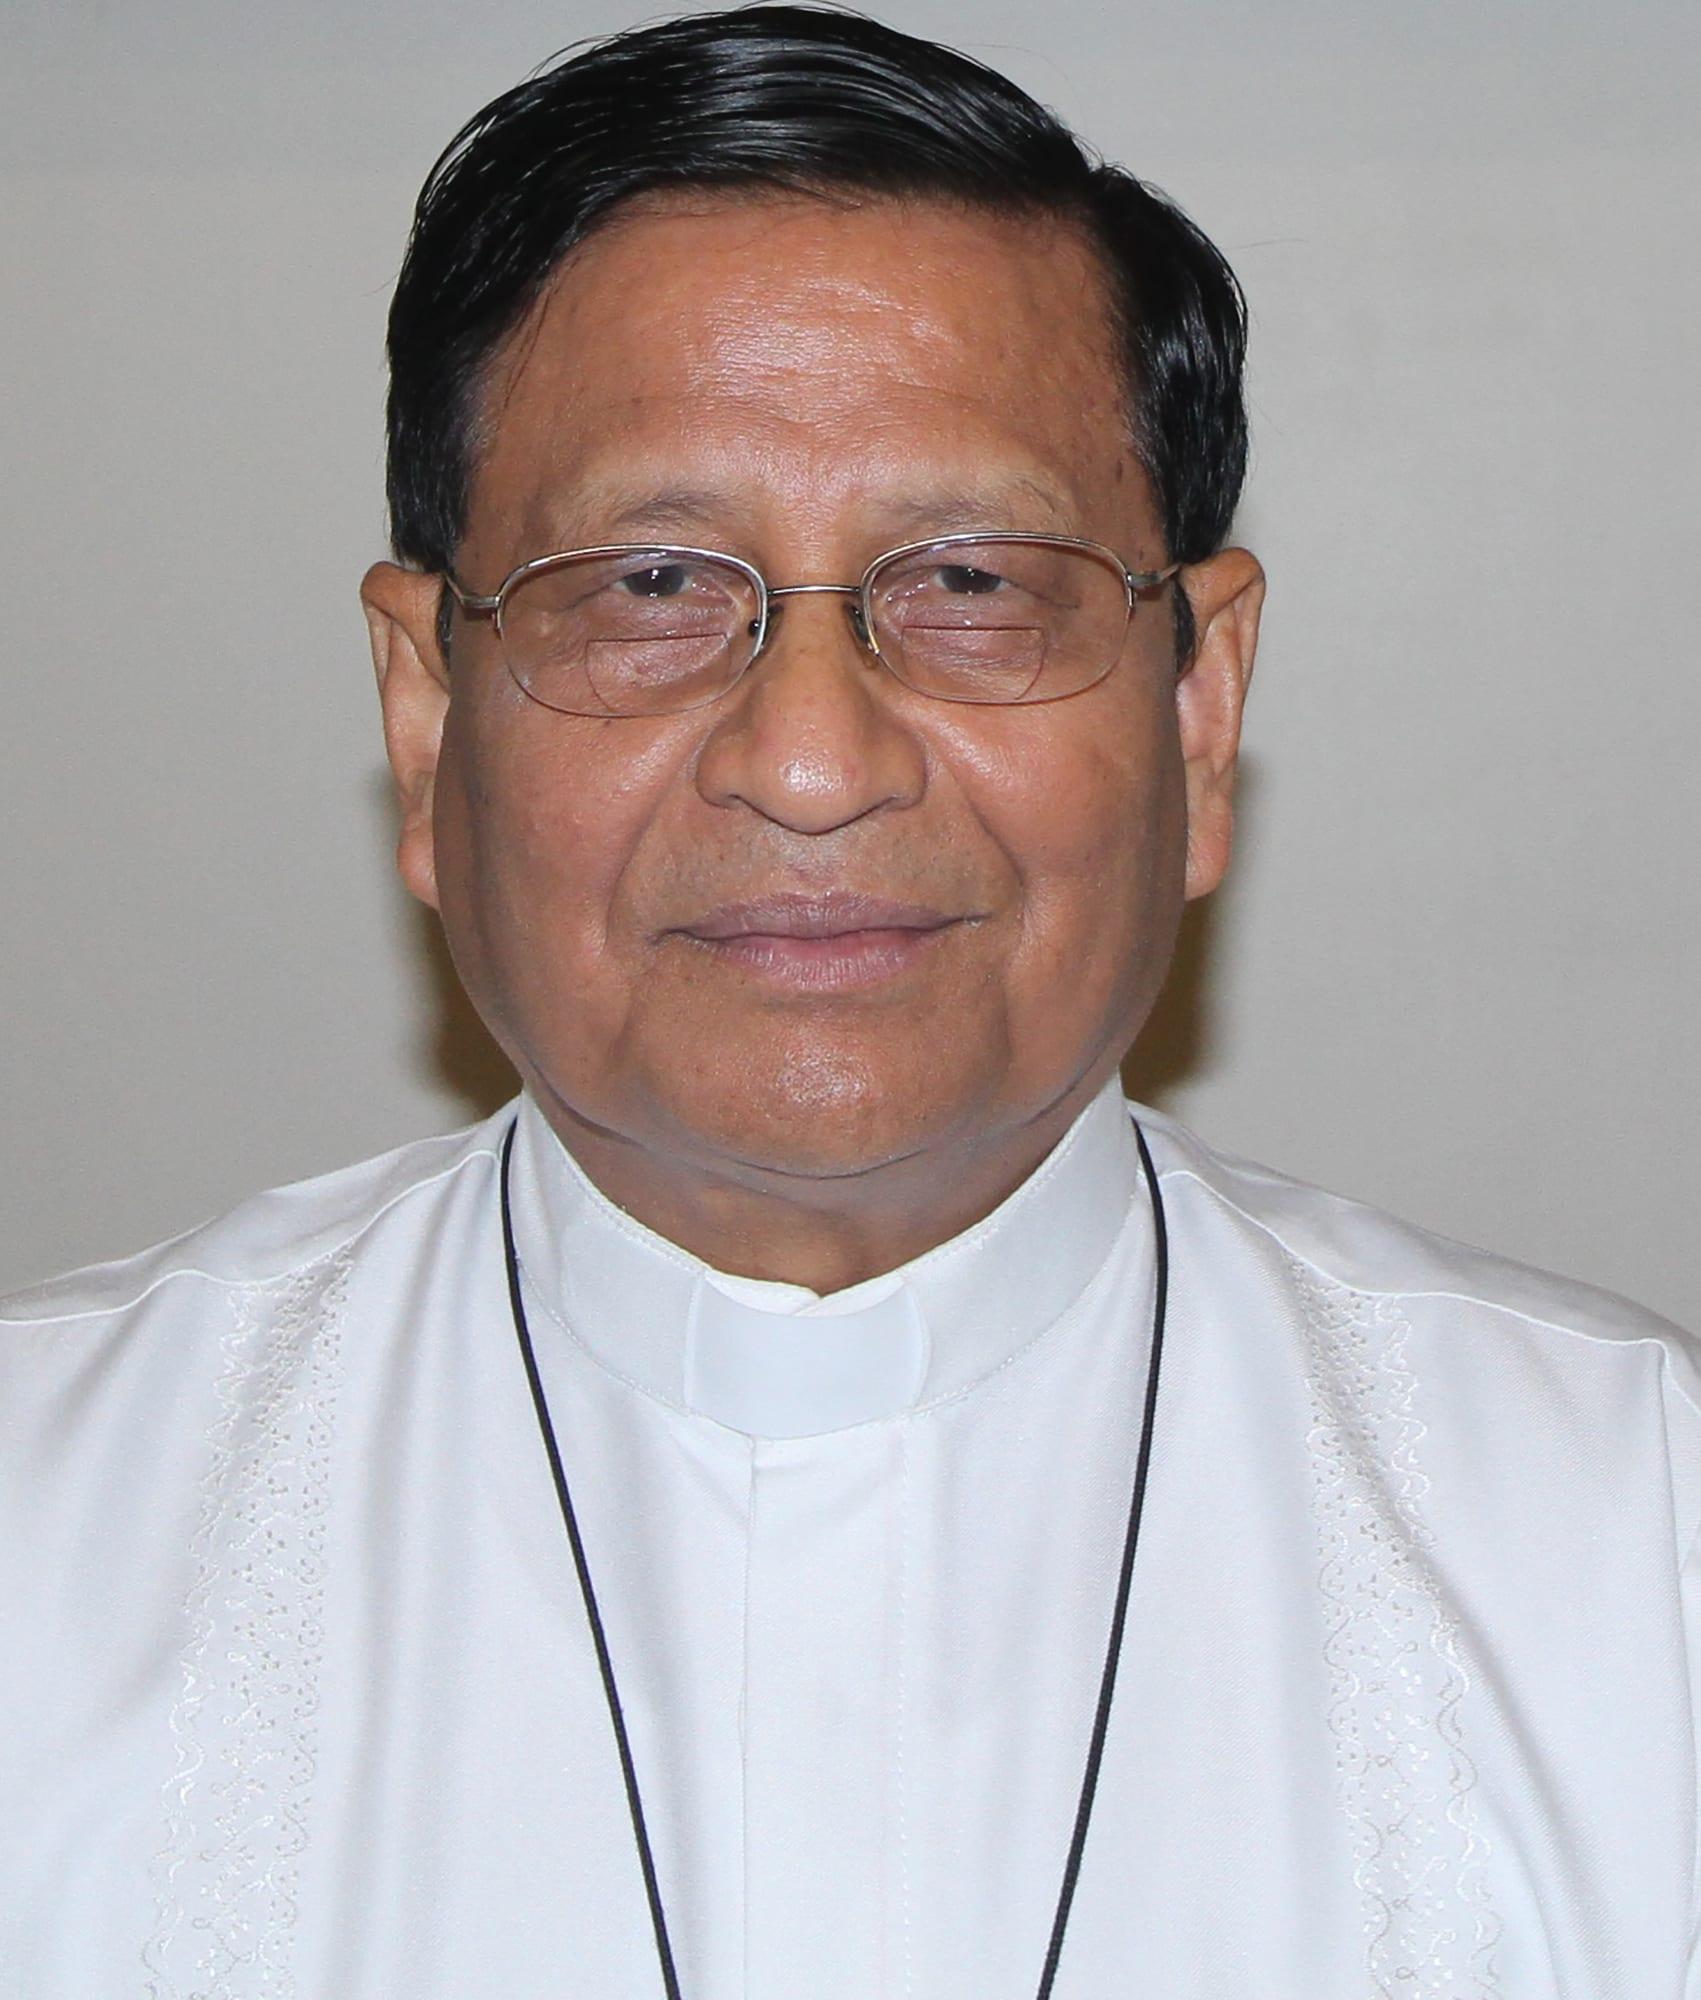 Myanmar cardinal to focus on peacebuilding as he takes over helm of FABC